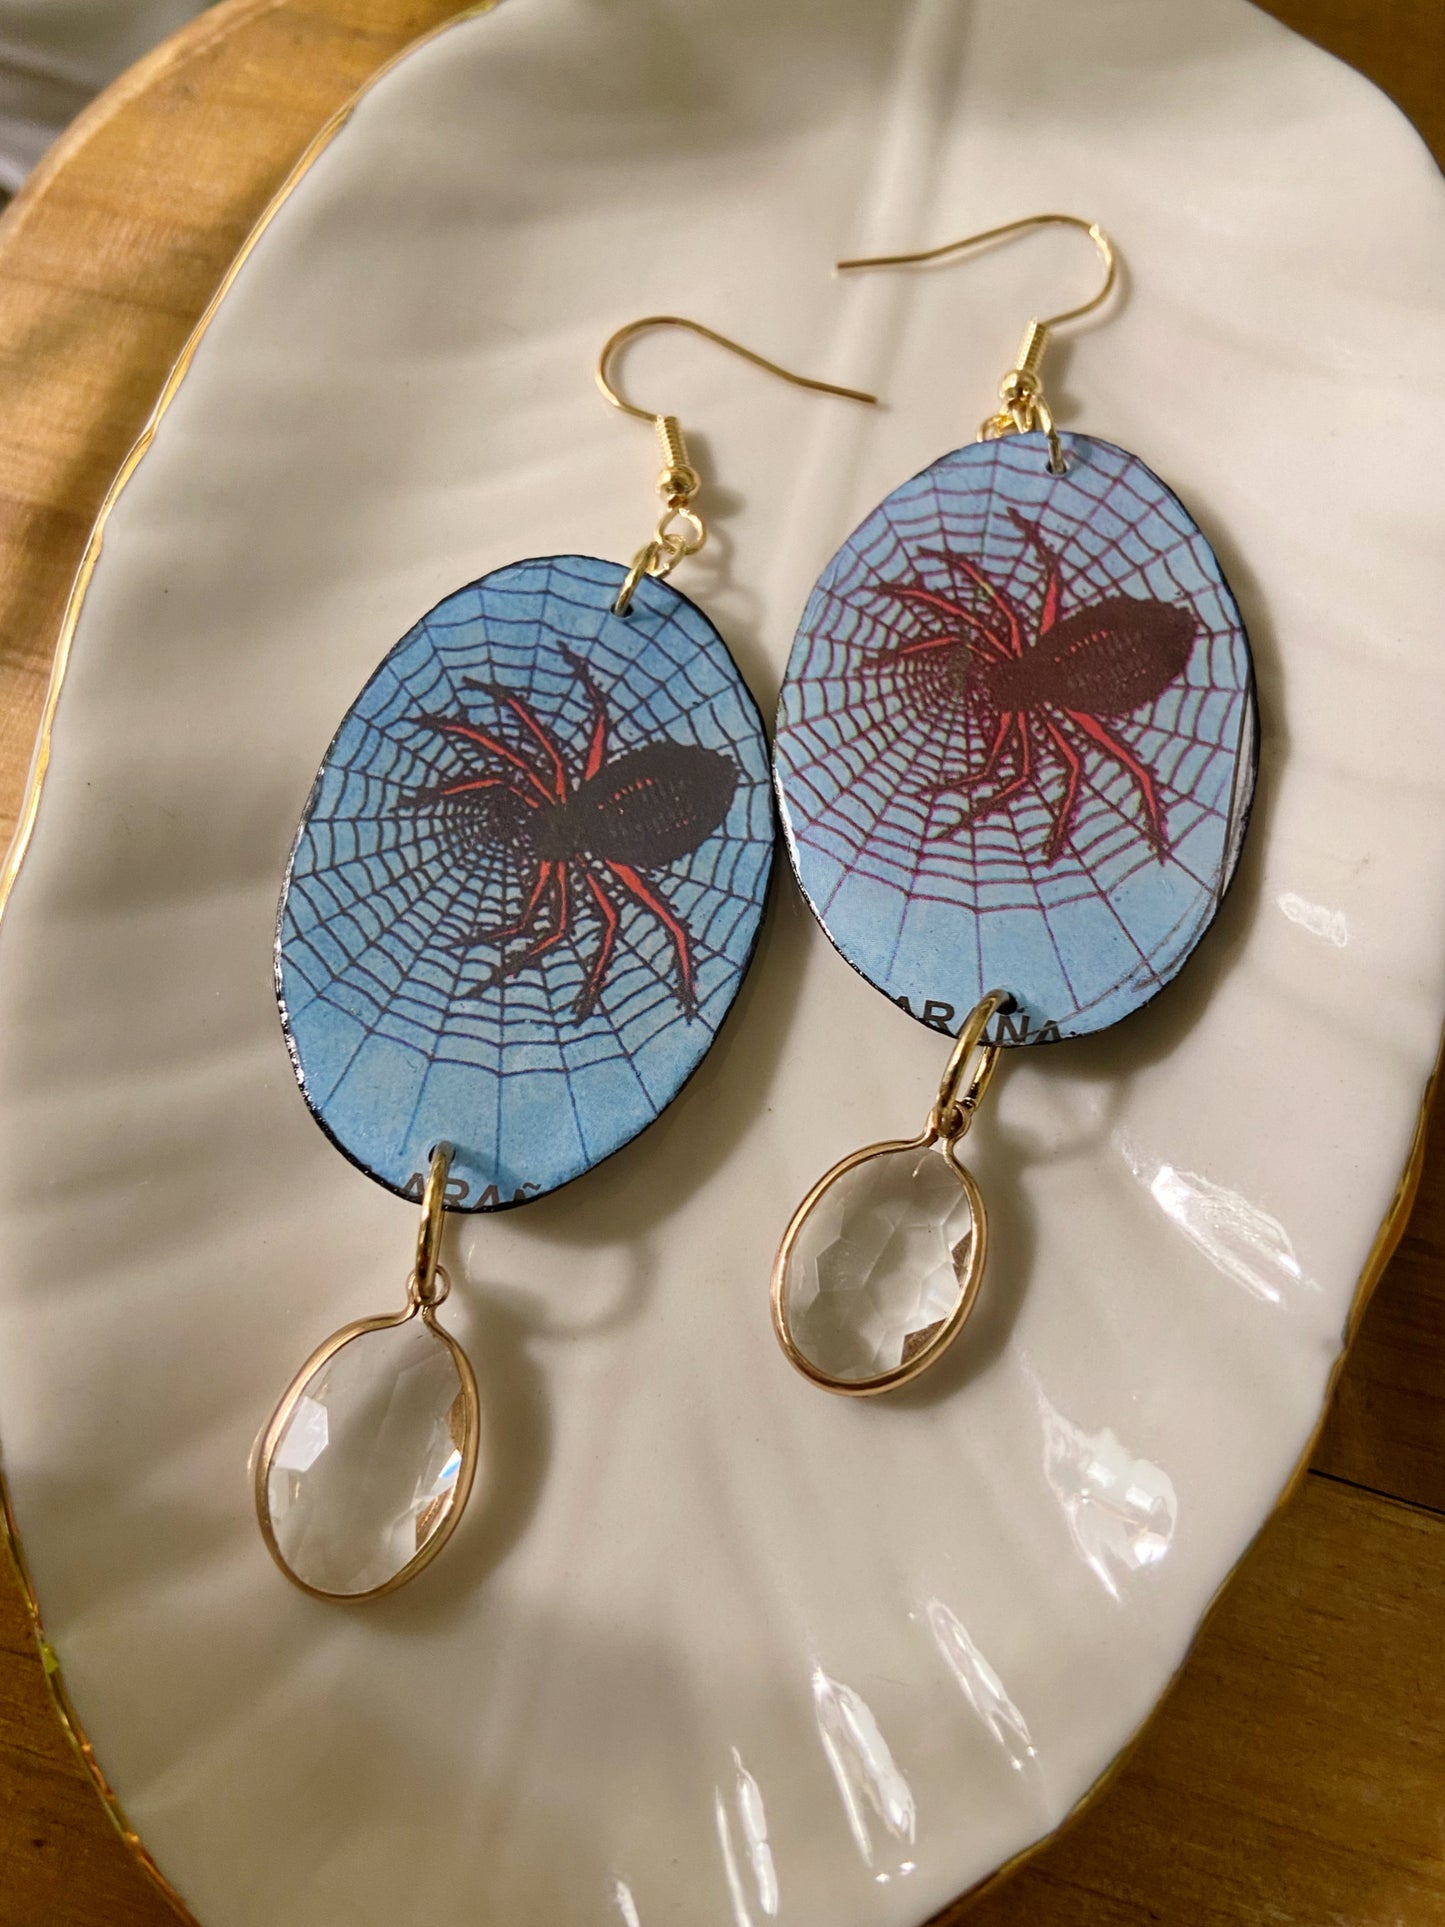 Loteria Cards- Upcycled paper "La Arana" oval statement earrings, spider novelty jewelry